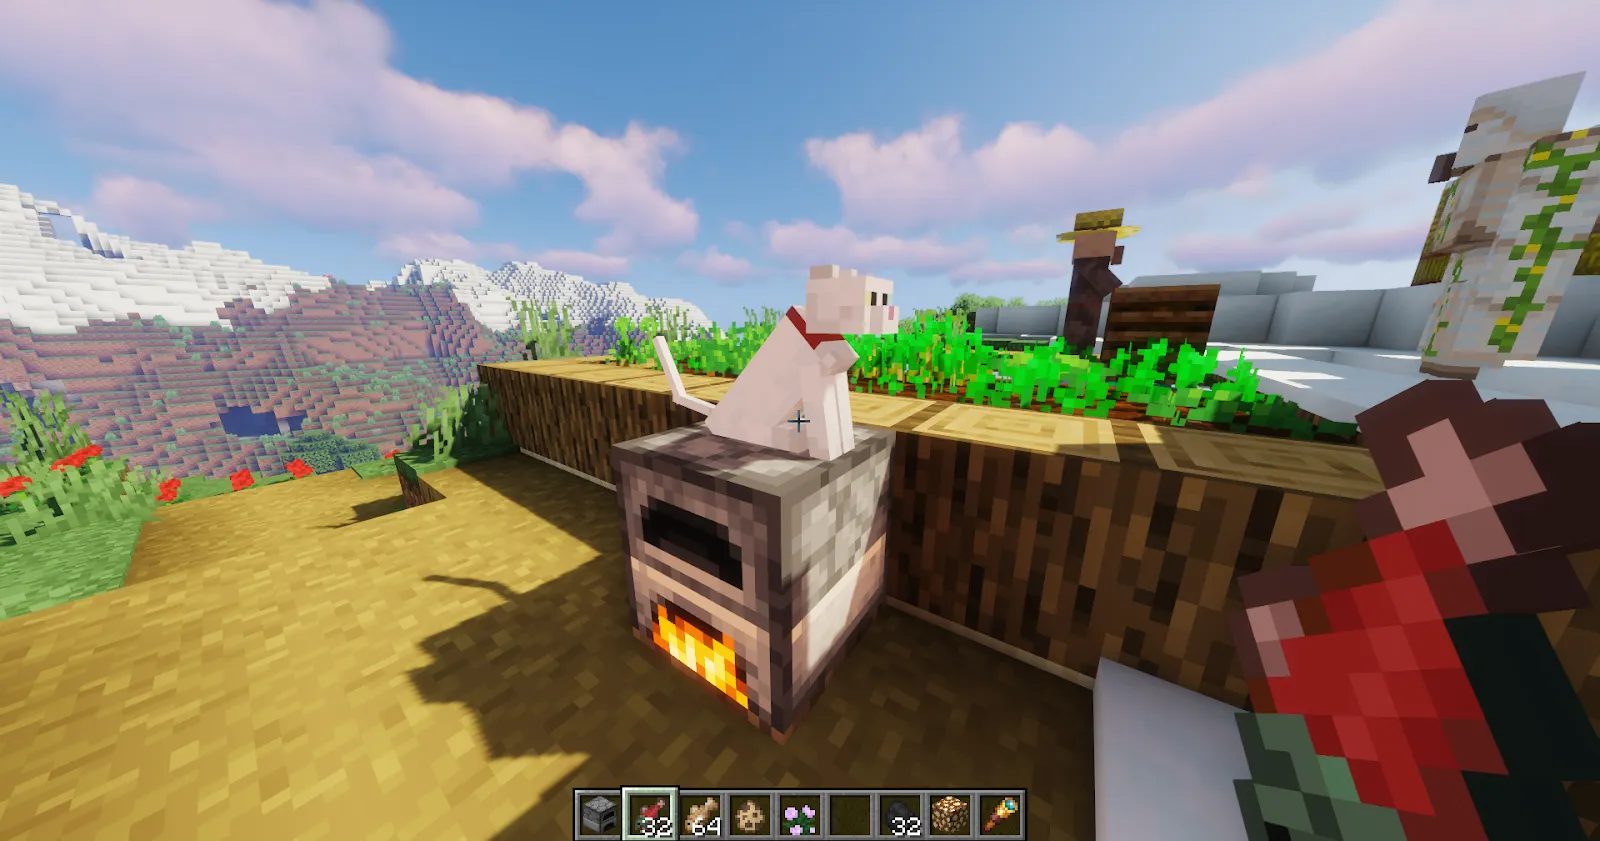 Tamed Minecraft Cat sitting on furnace